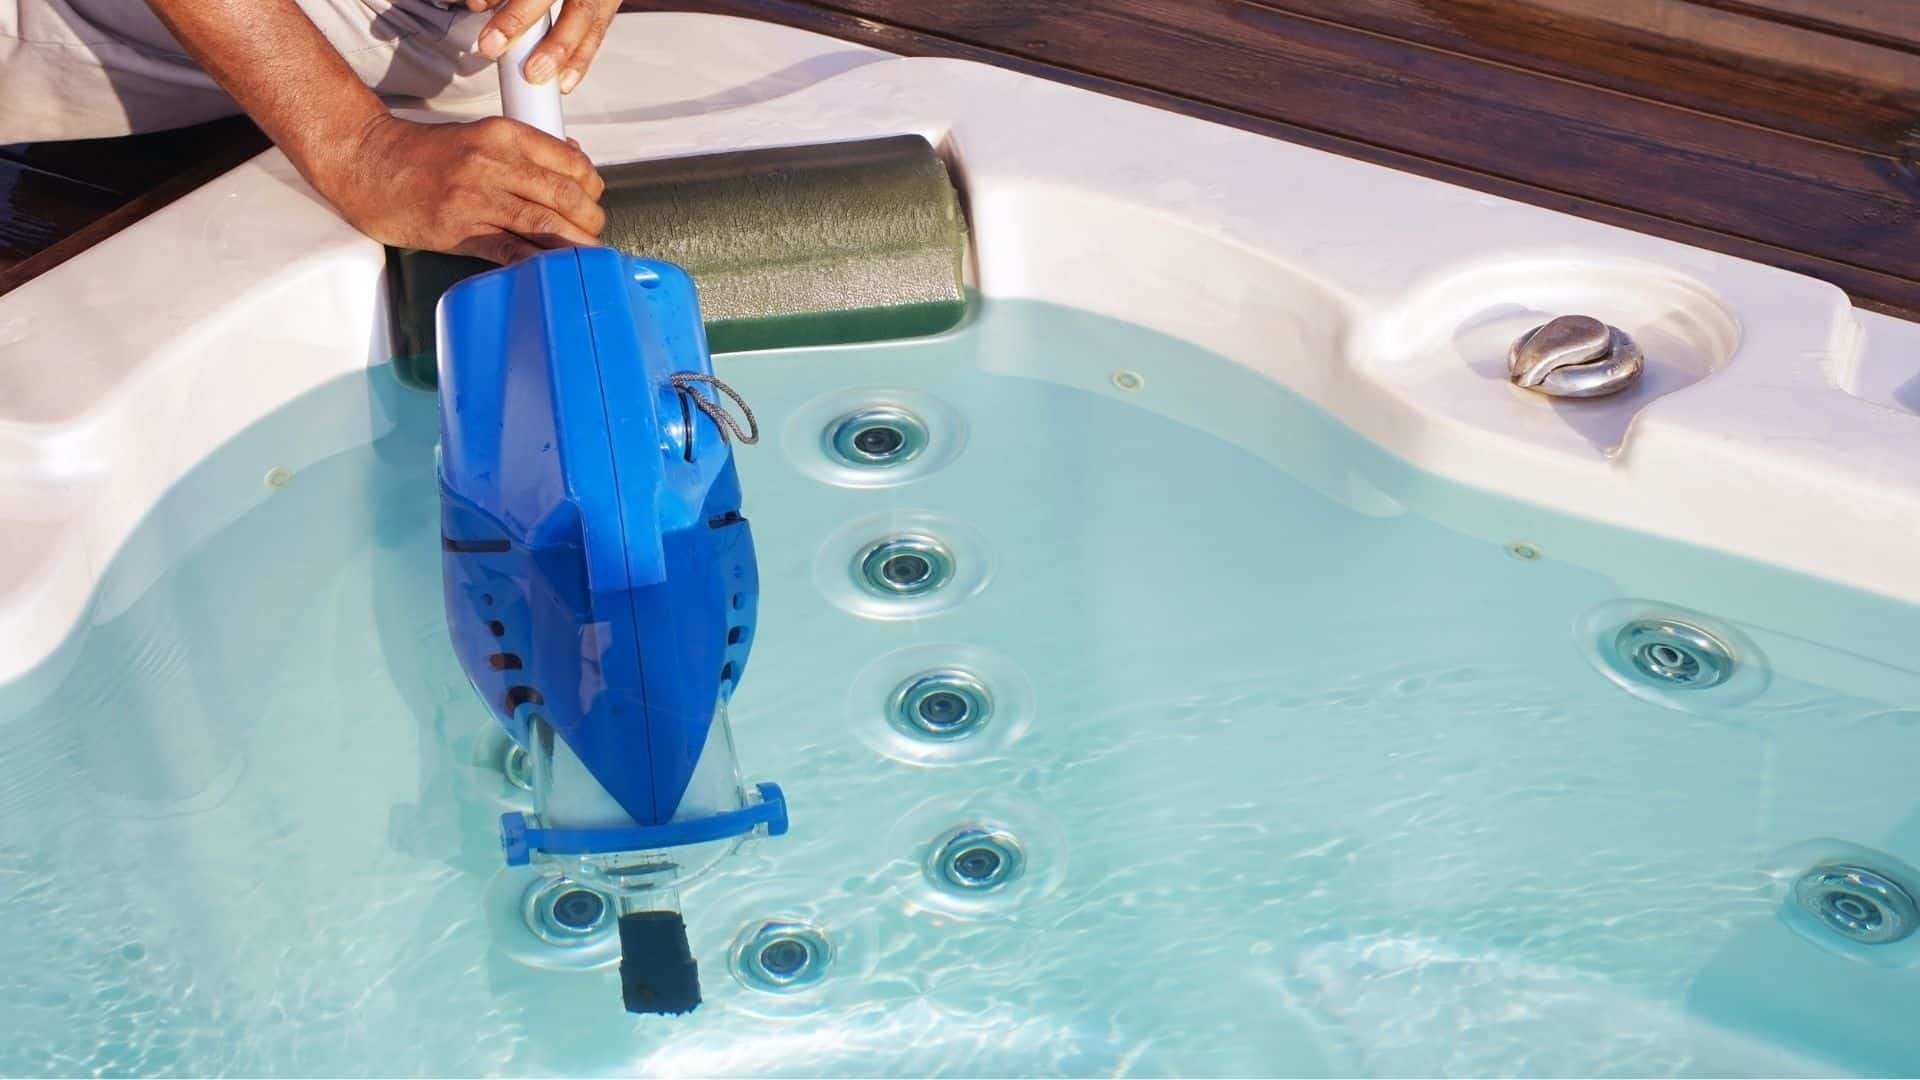 How To Clean Dirt Out Of Hot Tub